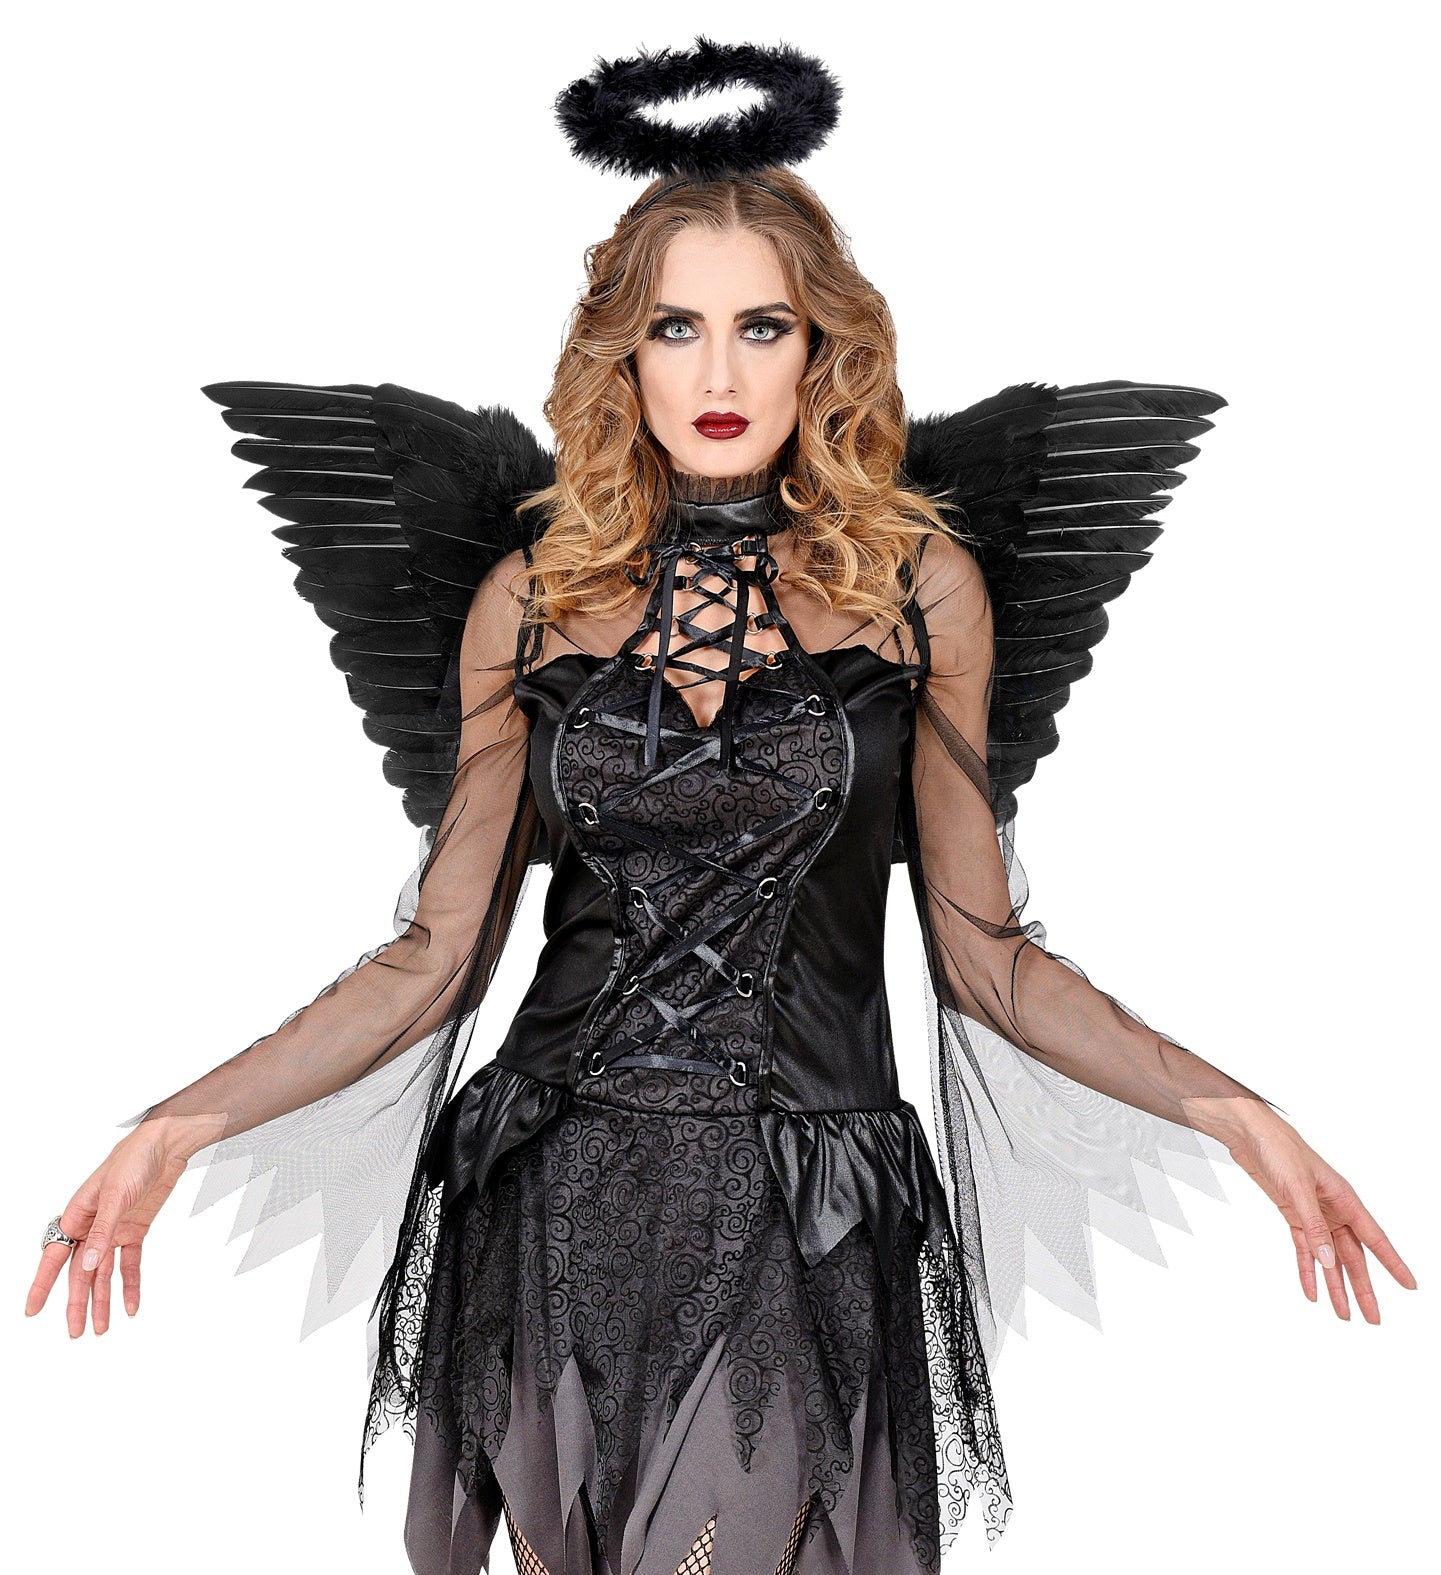 Black Feathered Wings for fallen angel costume